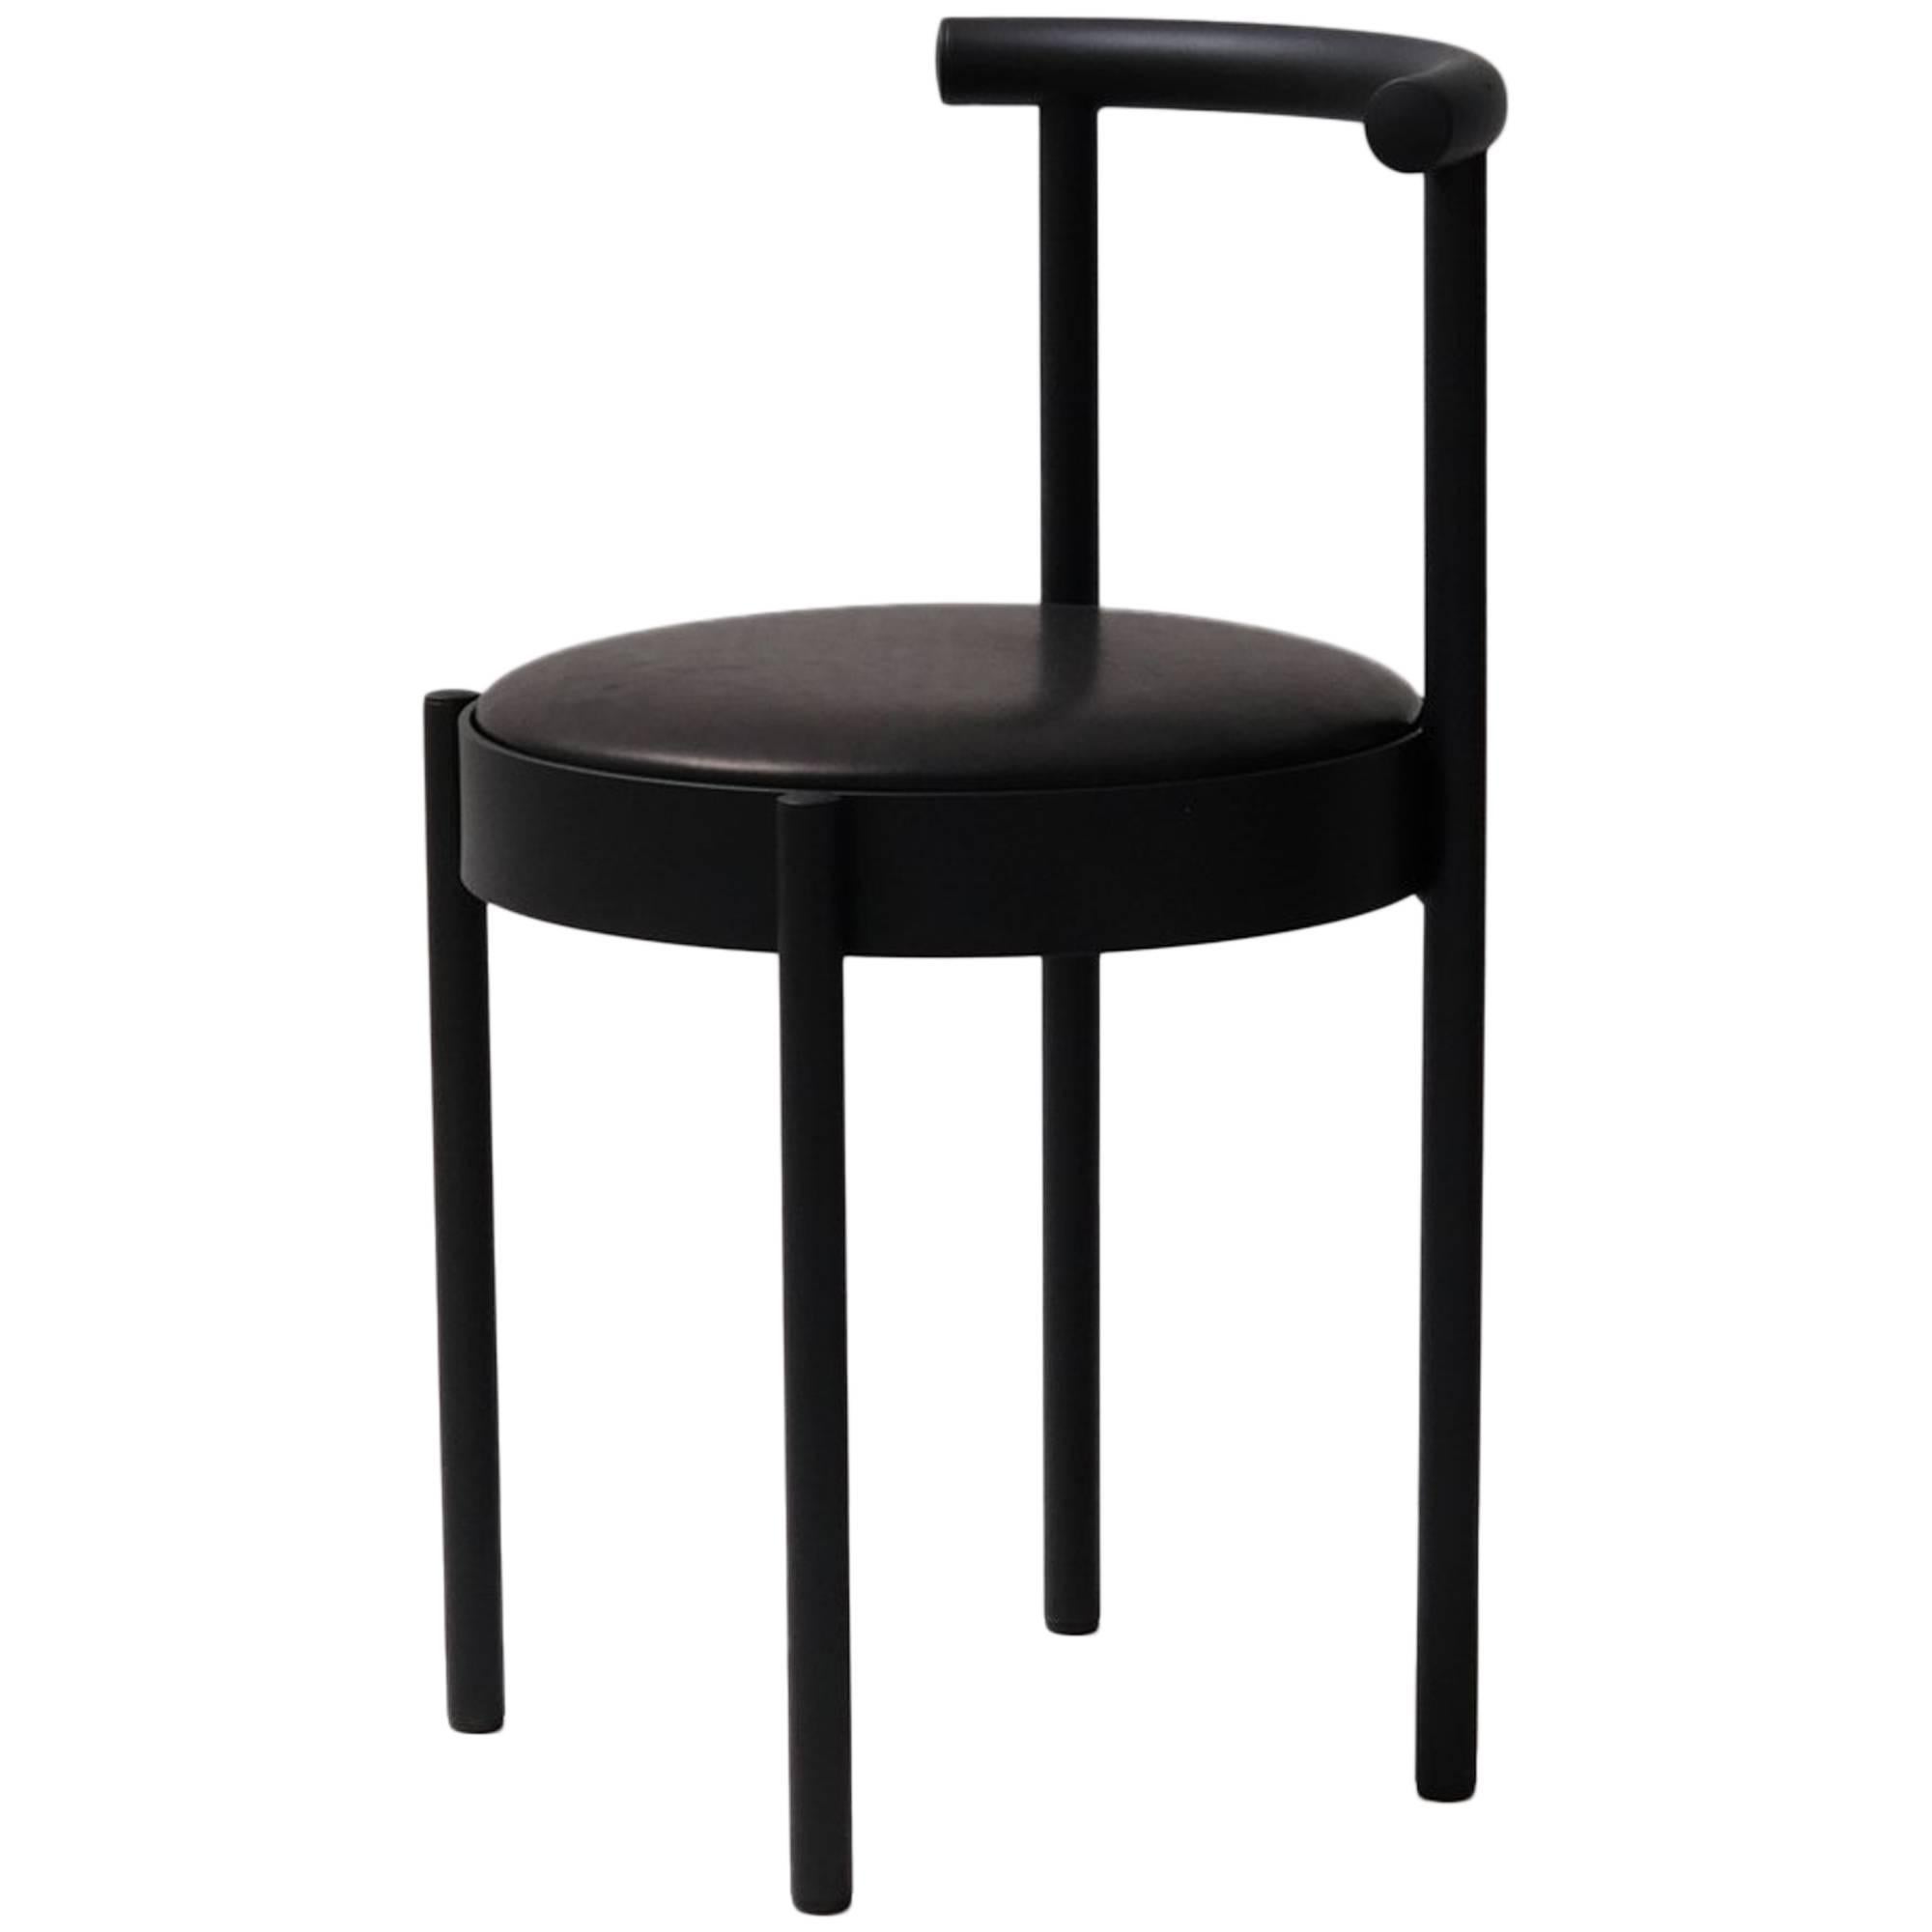 Soft Black Chair by Daniel Emma, Made in Australia For Sale